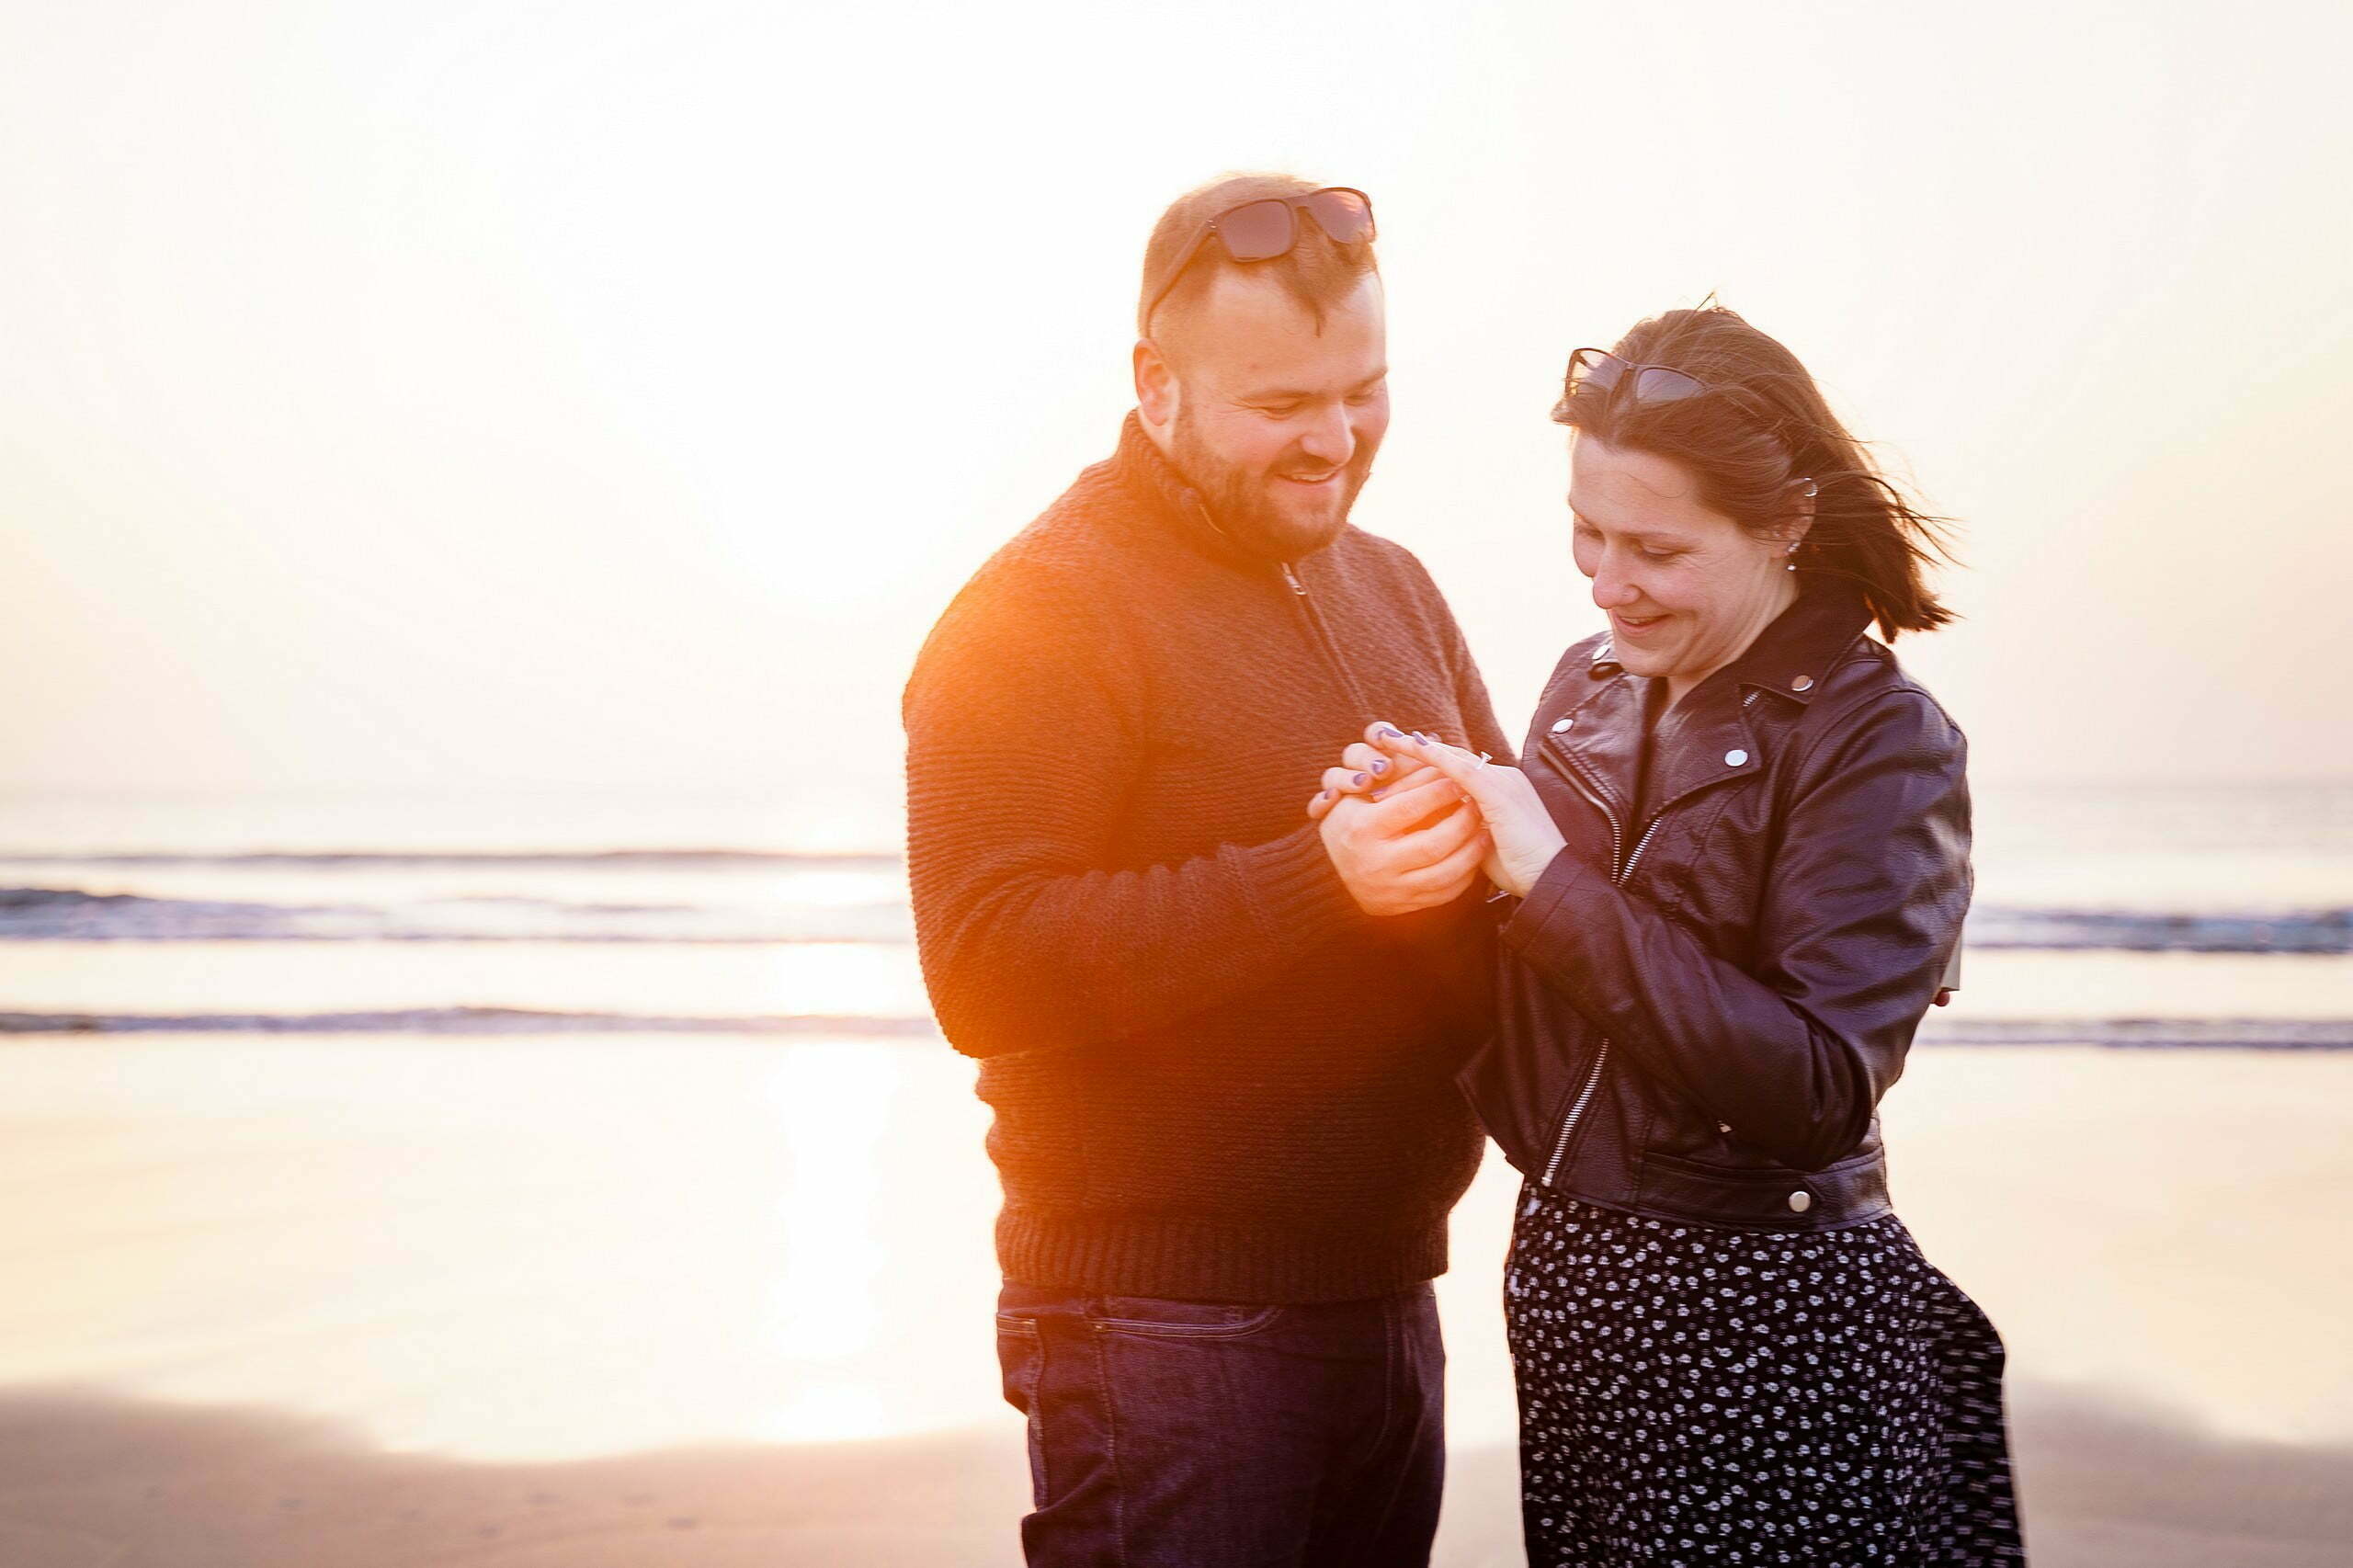 golden hour wedding proposal at Perranporth